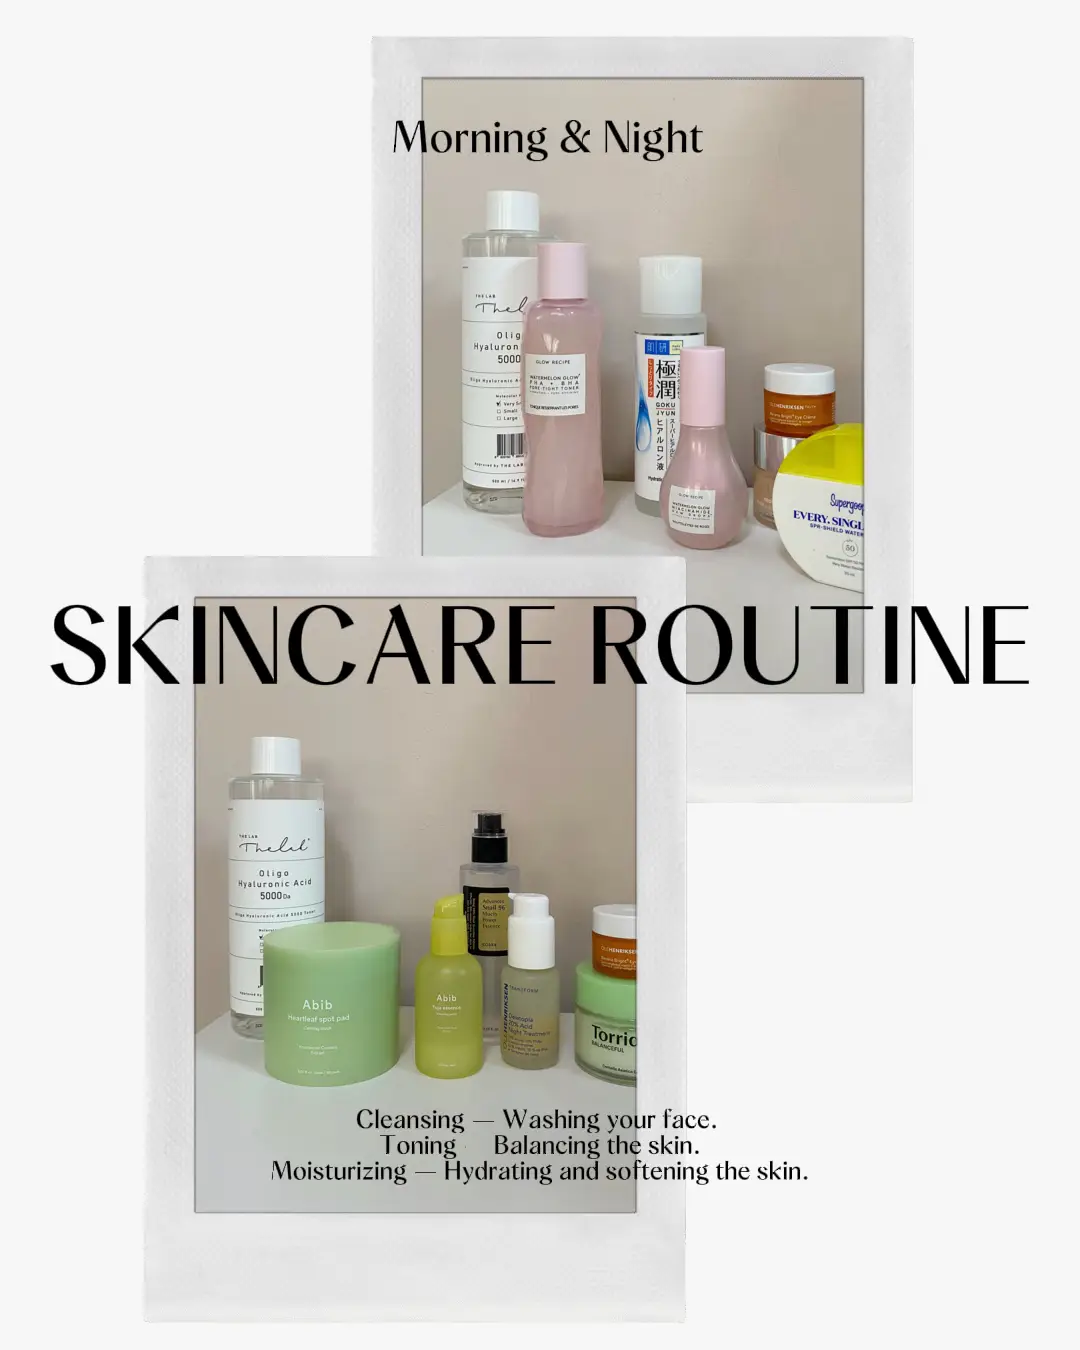 morn & night skincare routine | oily skin favs 🤍🫧's images(0)